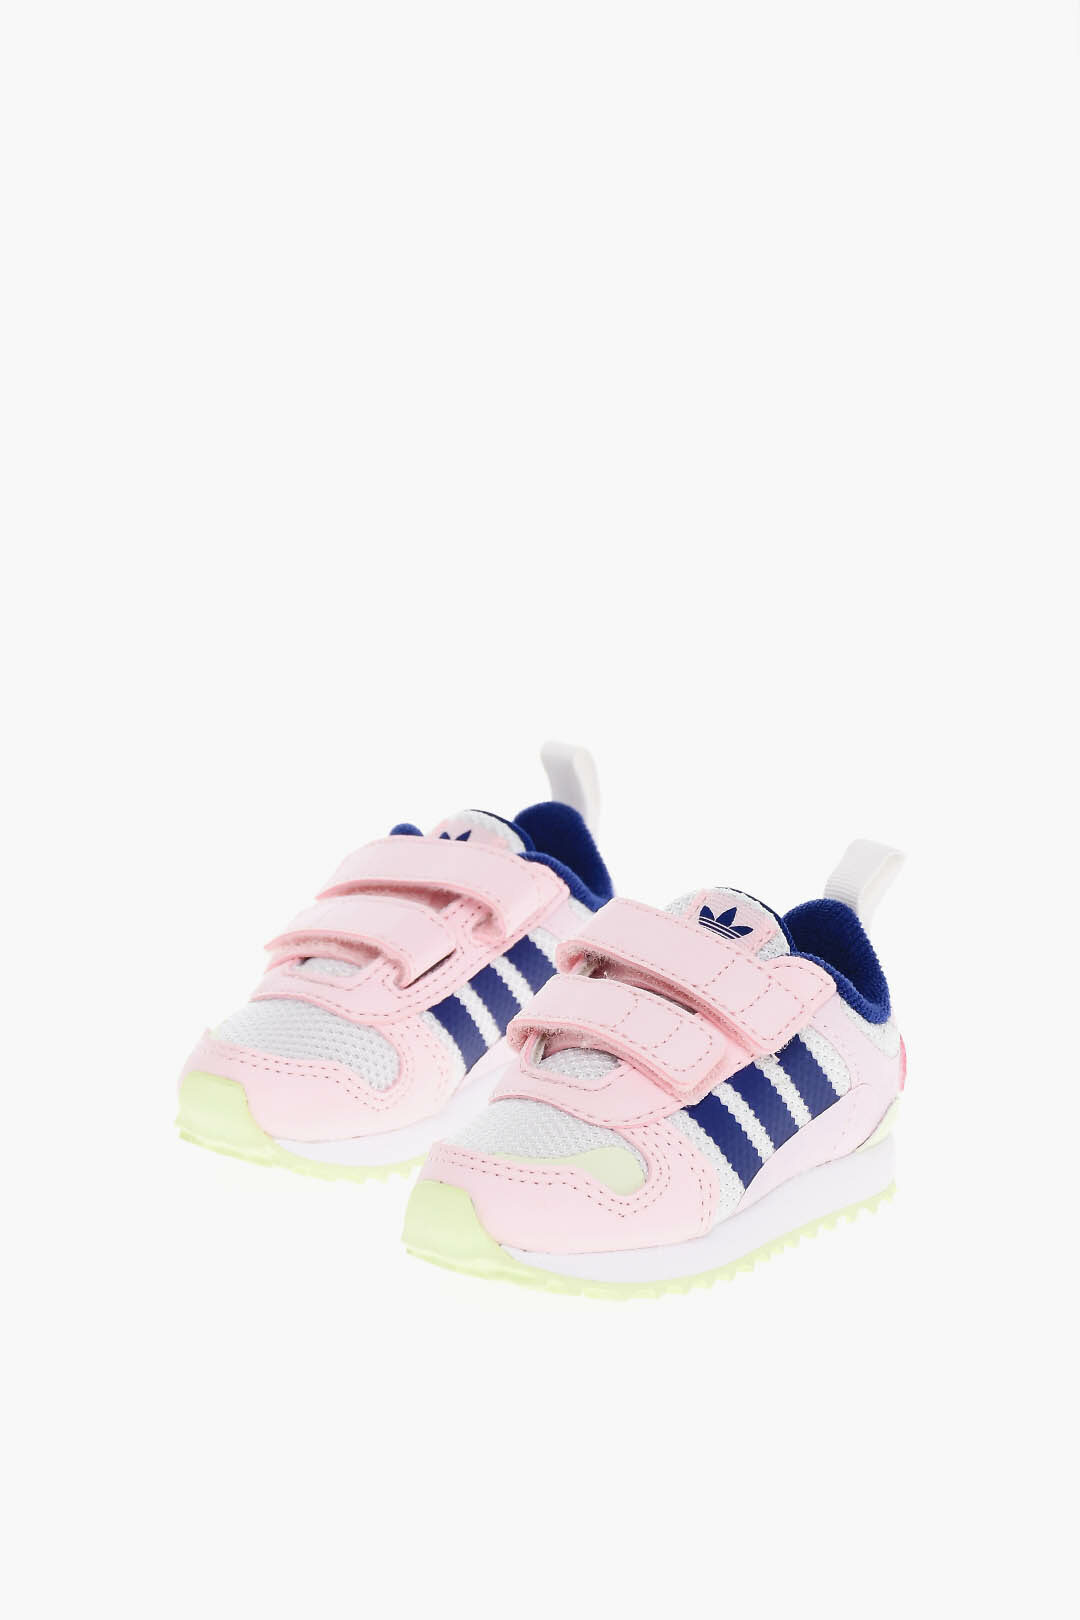 slang Paine Gillic weekend Adidas Kids ZX 700 HD CF Low Sneakers with Velcro Fastening girls - Glamood  Outlet